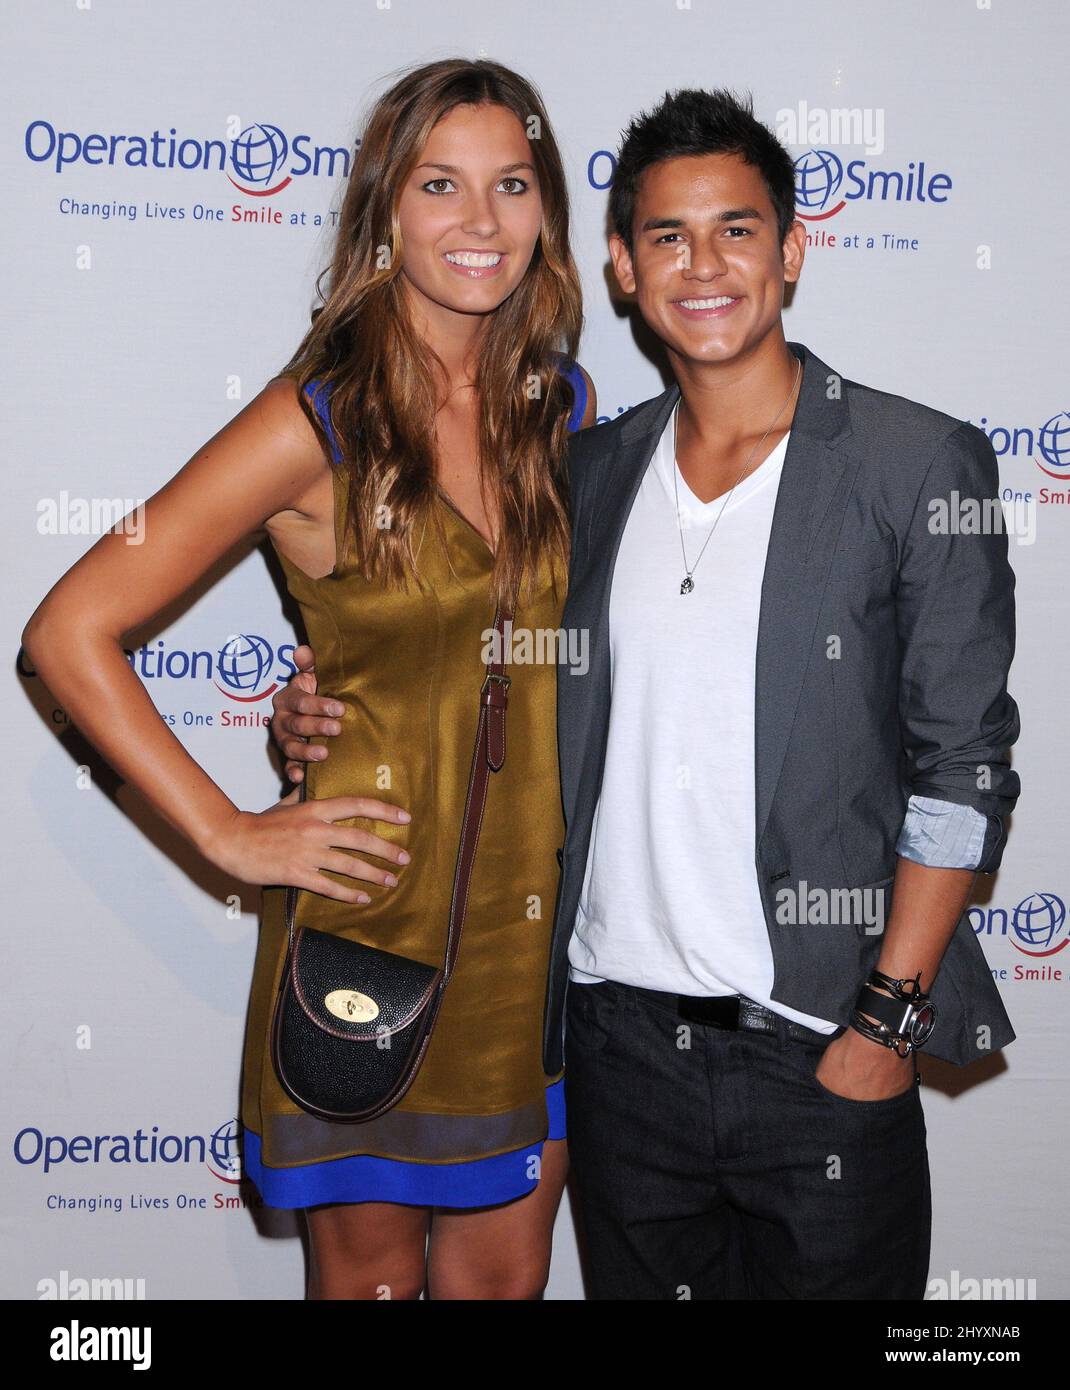 Bronson Pelletier and Sabine Moestrup at Operation Smile's 9th Annual Smile Gala held at the Beverly Hilton Hotel, Beverly Hills. Stock Photo